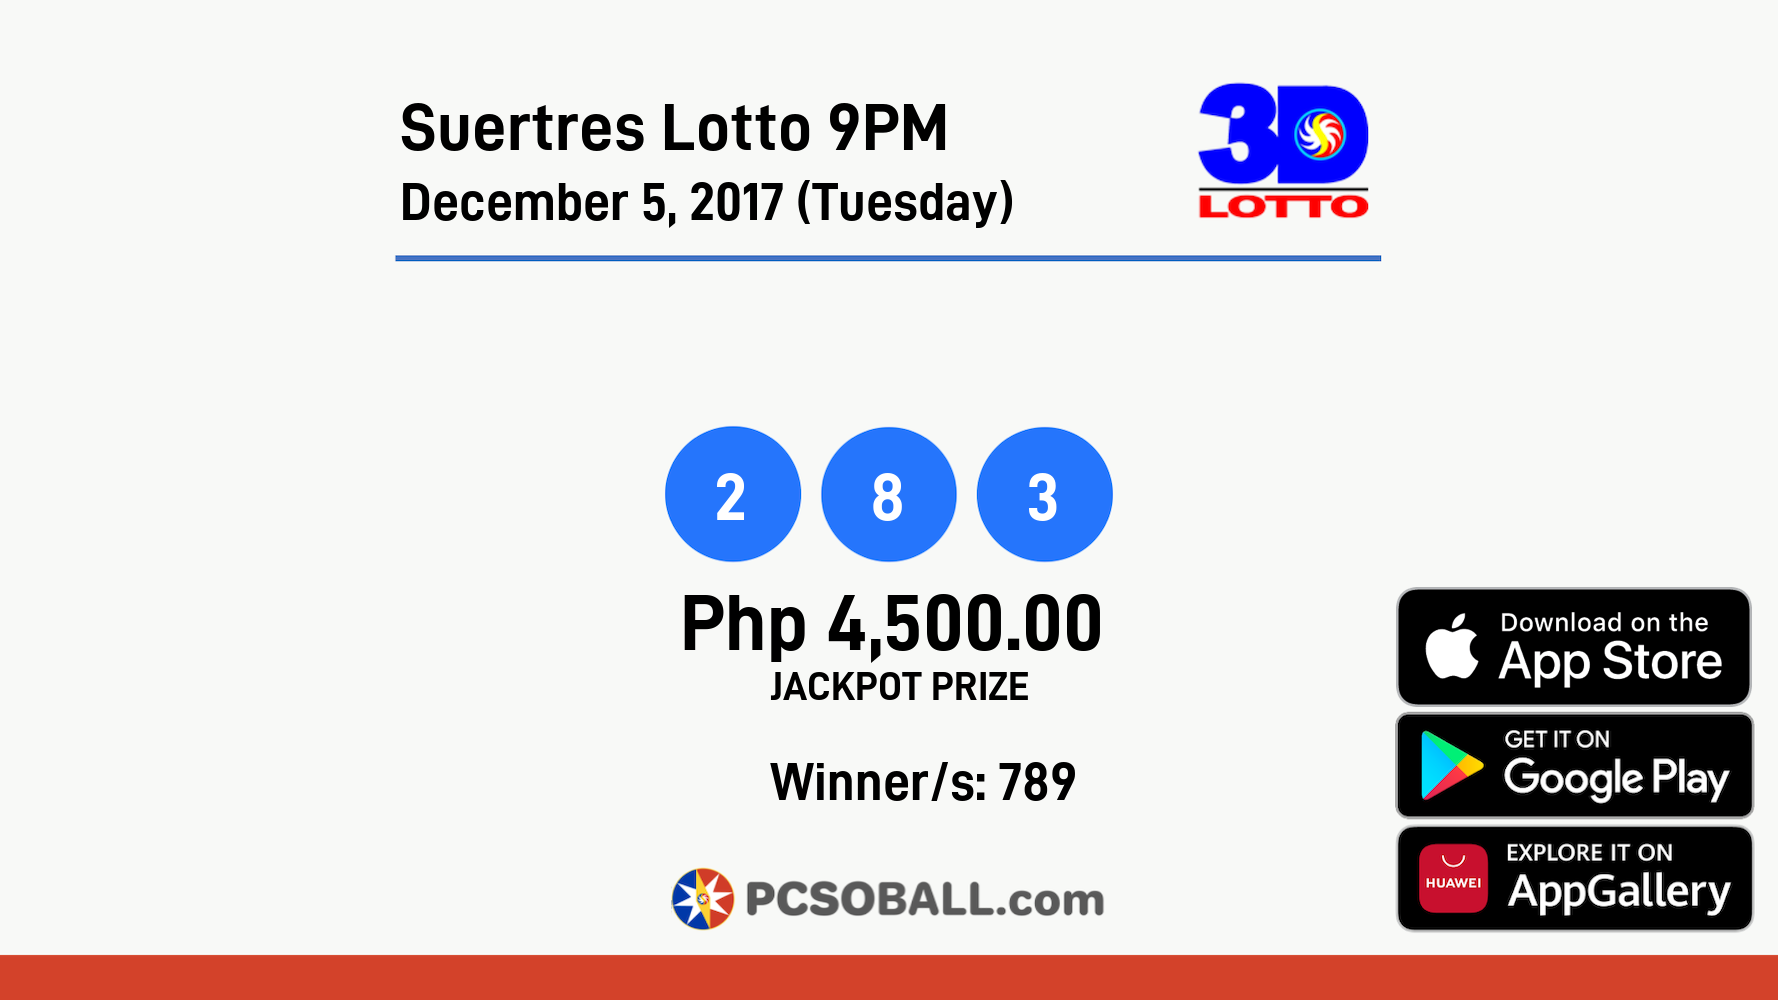 Suertres Lotto 9PM December 5, 2017 (Tuesday) Result